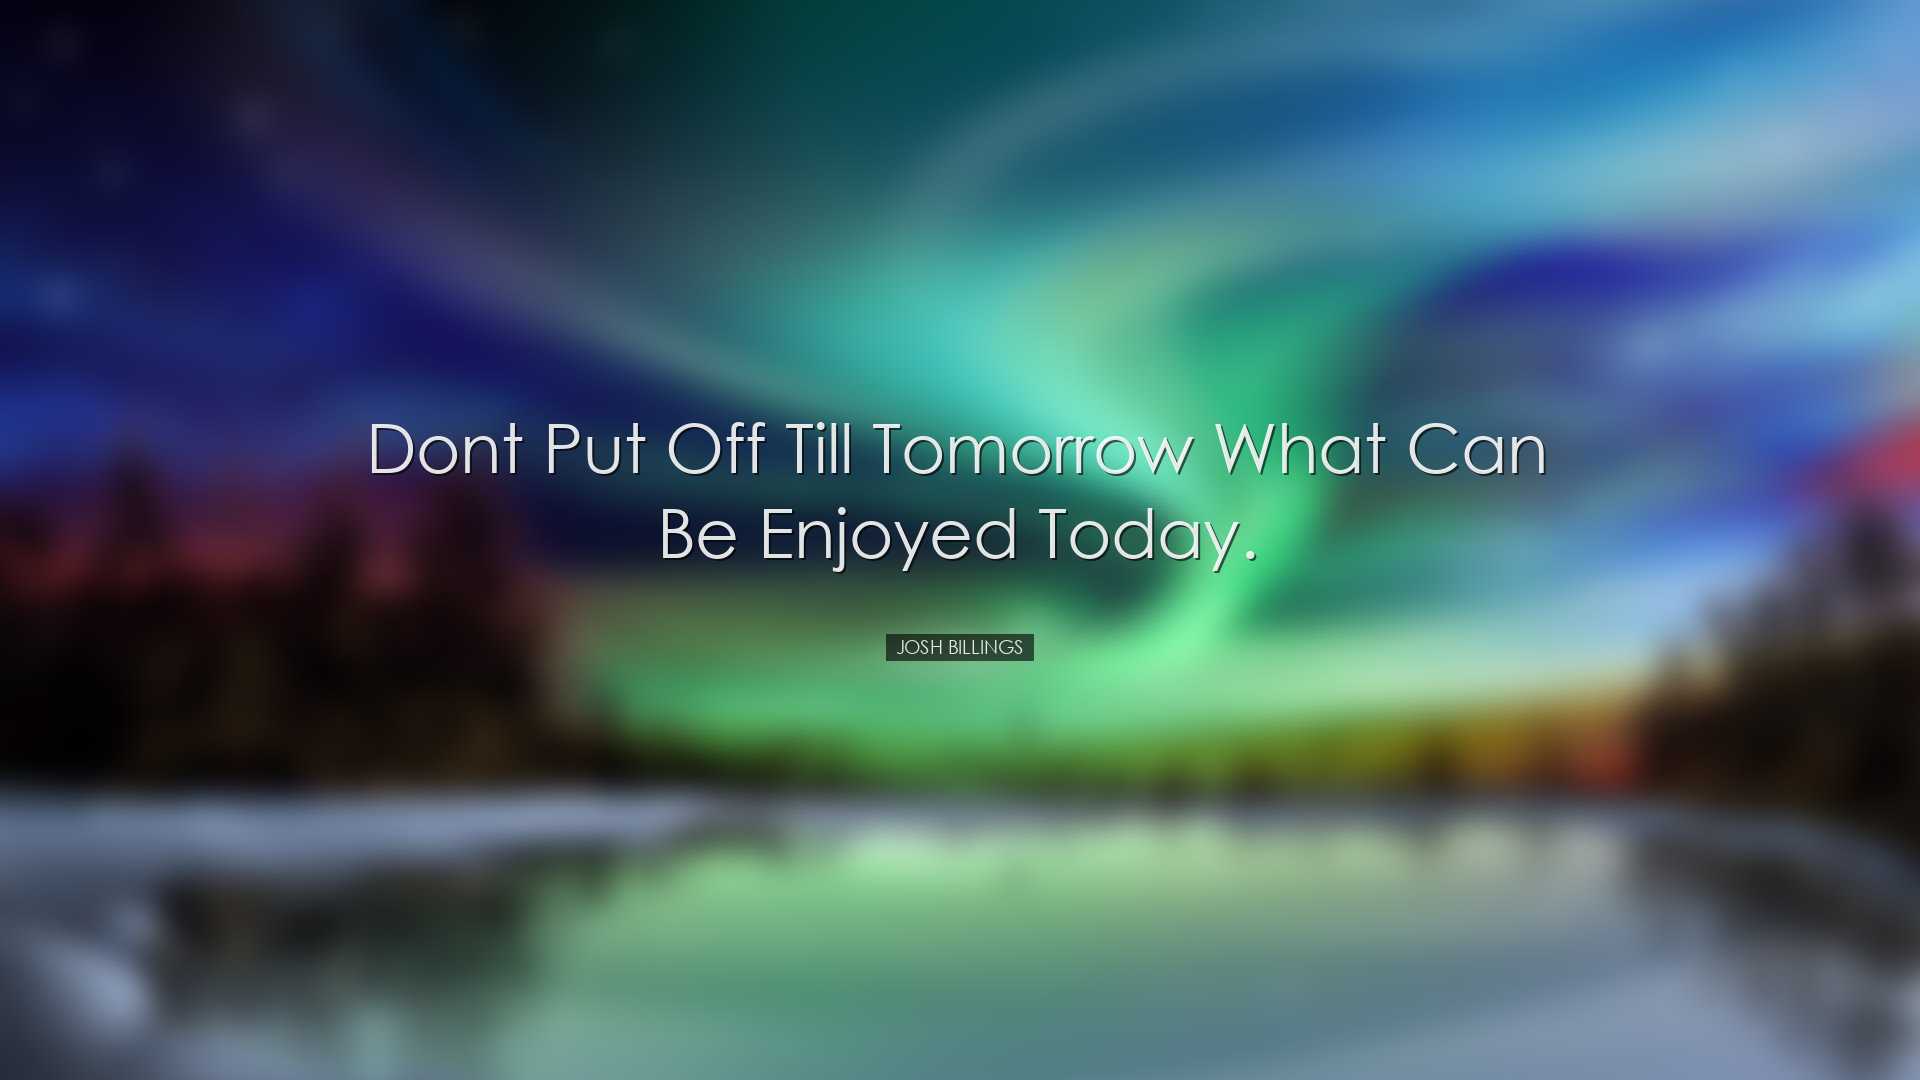 Dont put off till tomorrow what can be enjoyed today. - Josh Billi